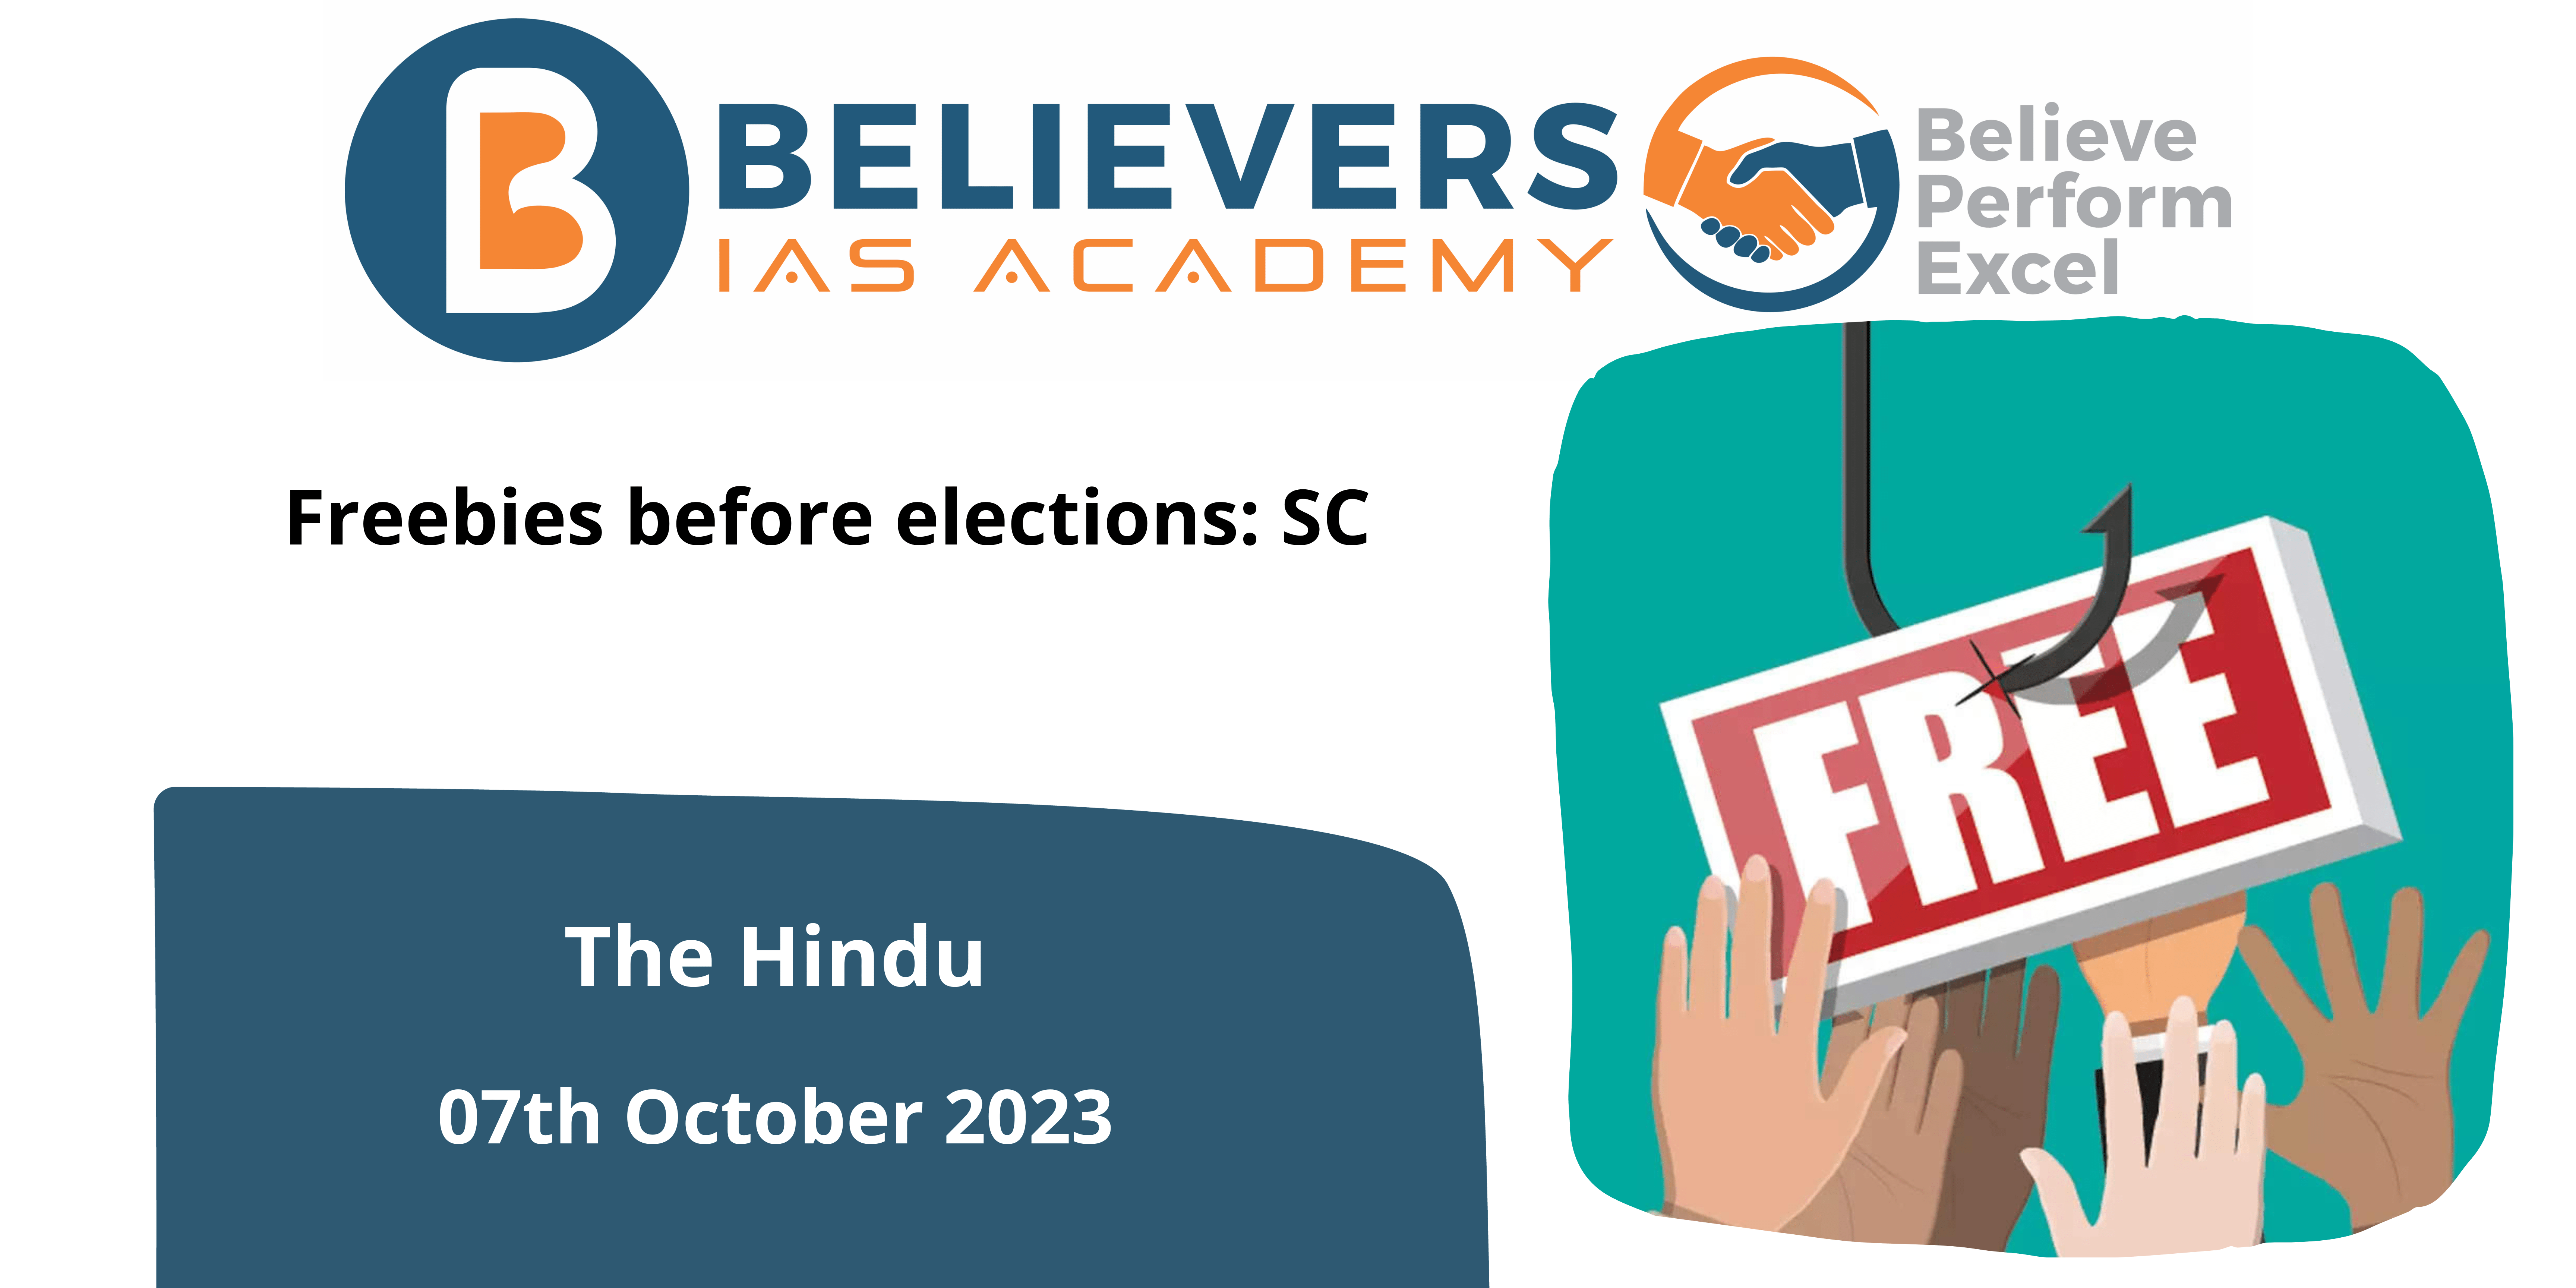 Freebies before elections: SC